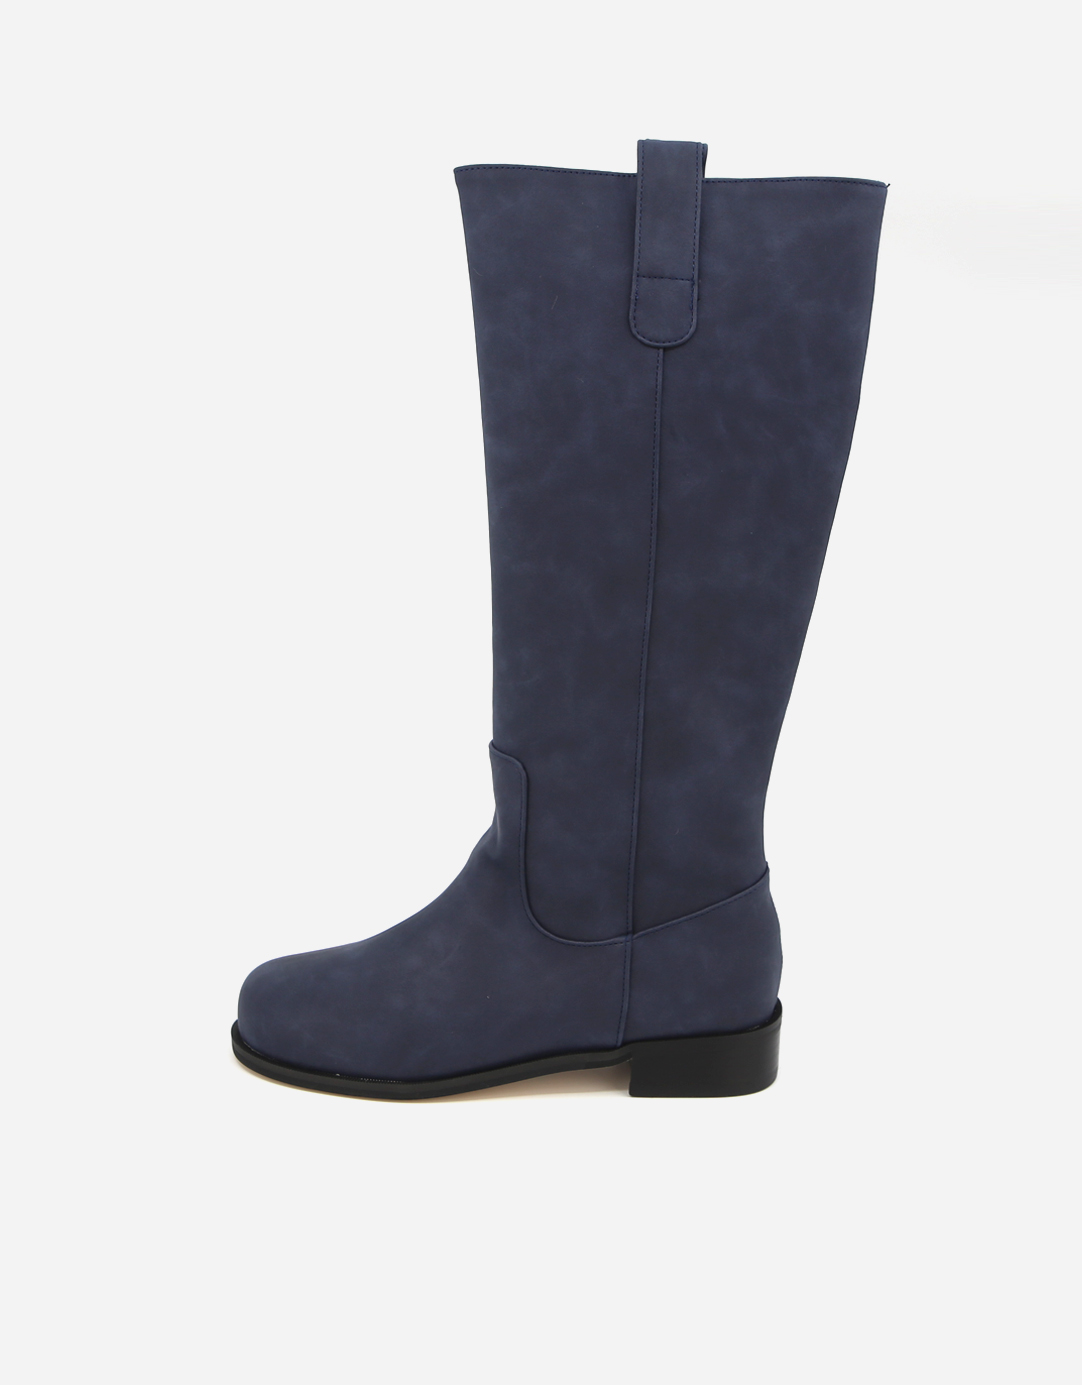 ROUND CRUSH SUEDE LONG BOOTS